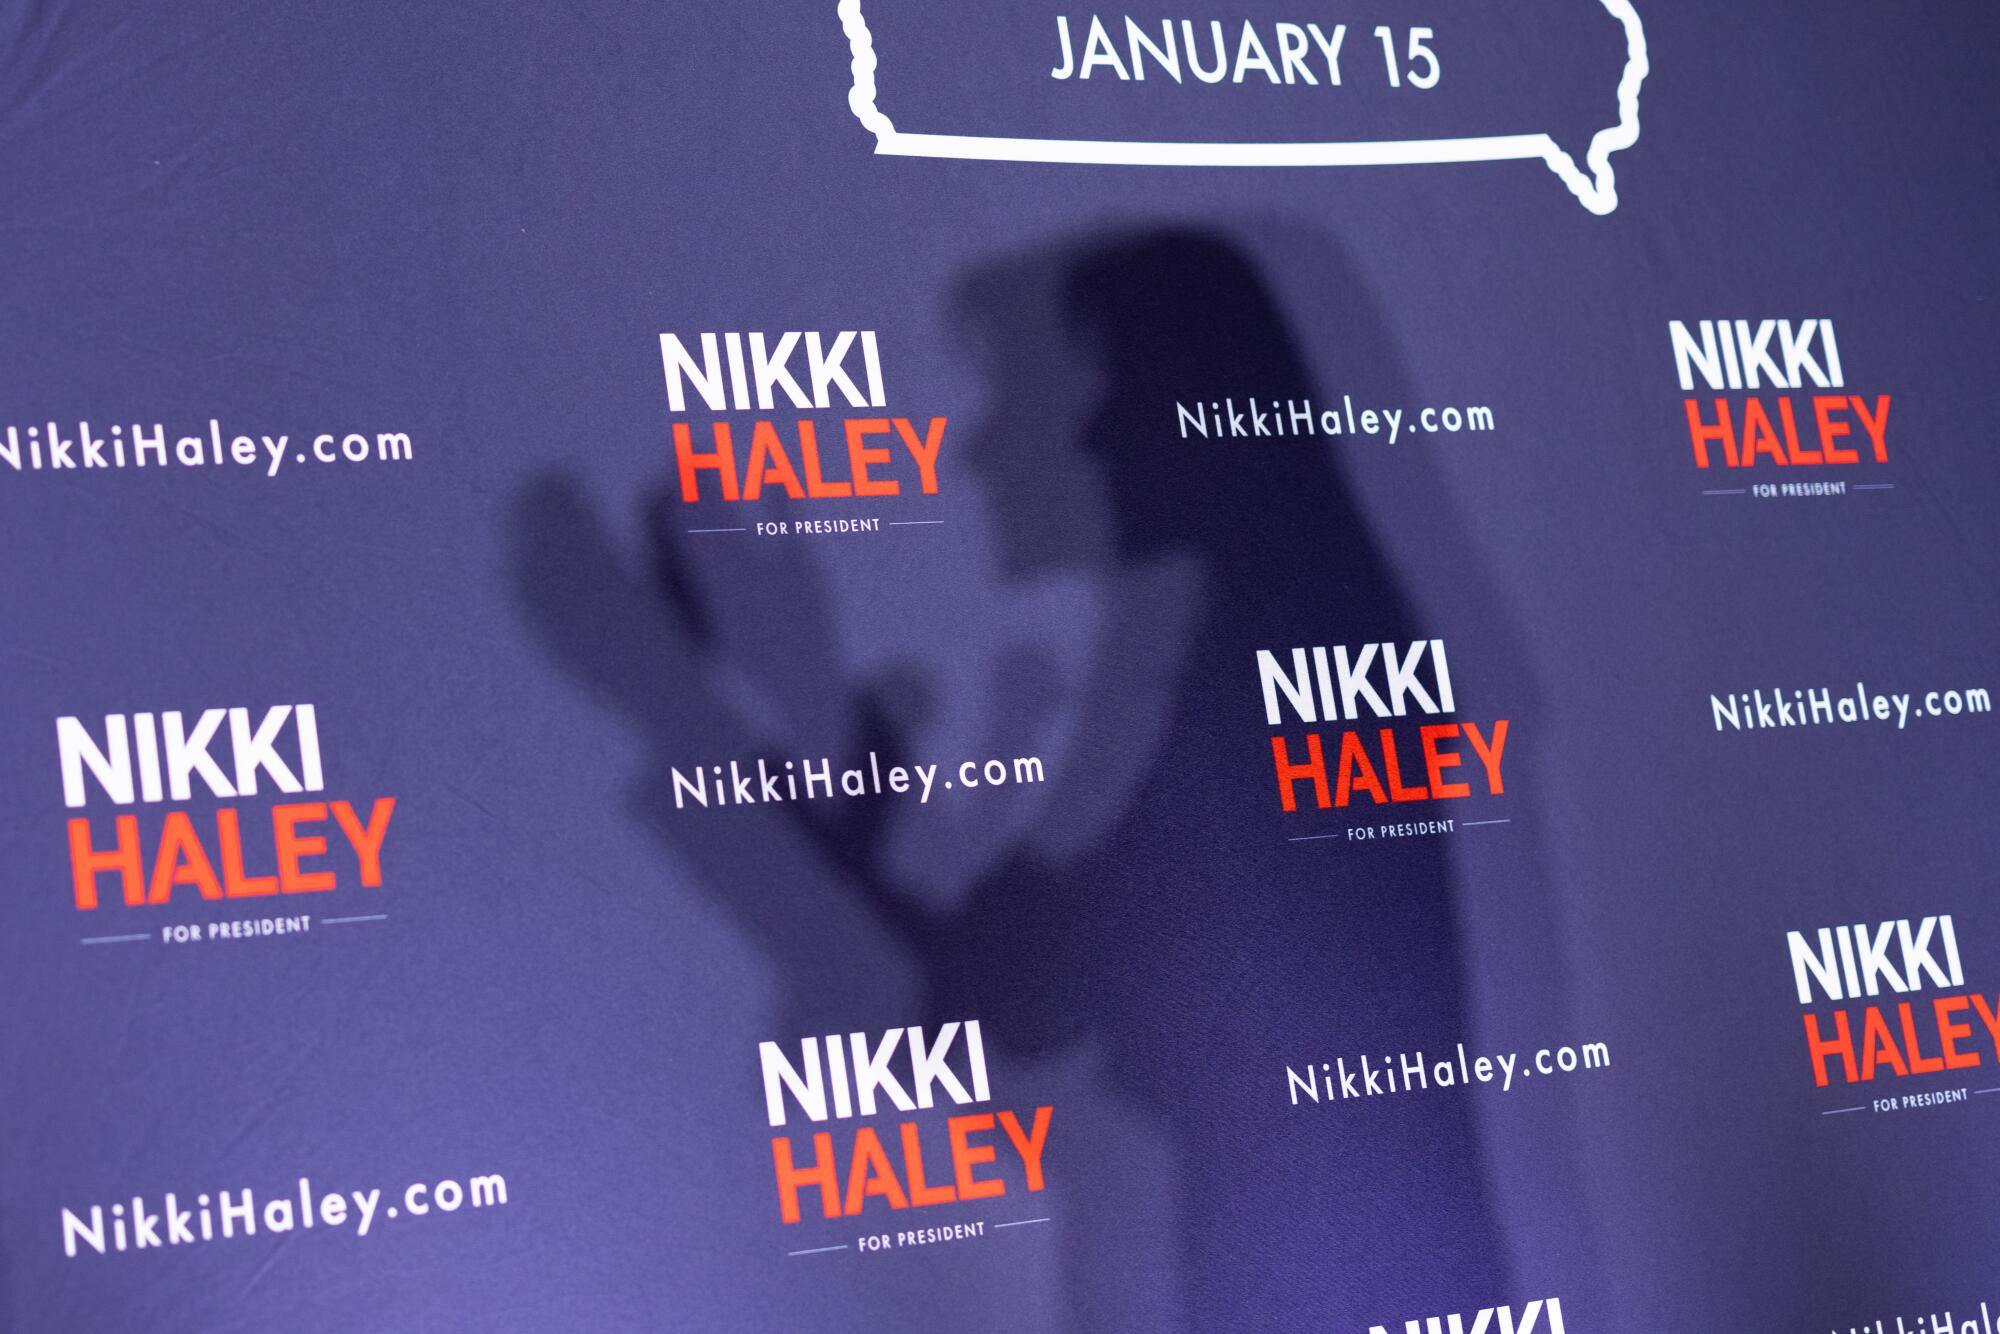 Nikki Haley's shadow on the wall behind her as she speaks at a campaign event